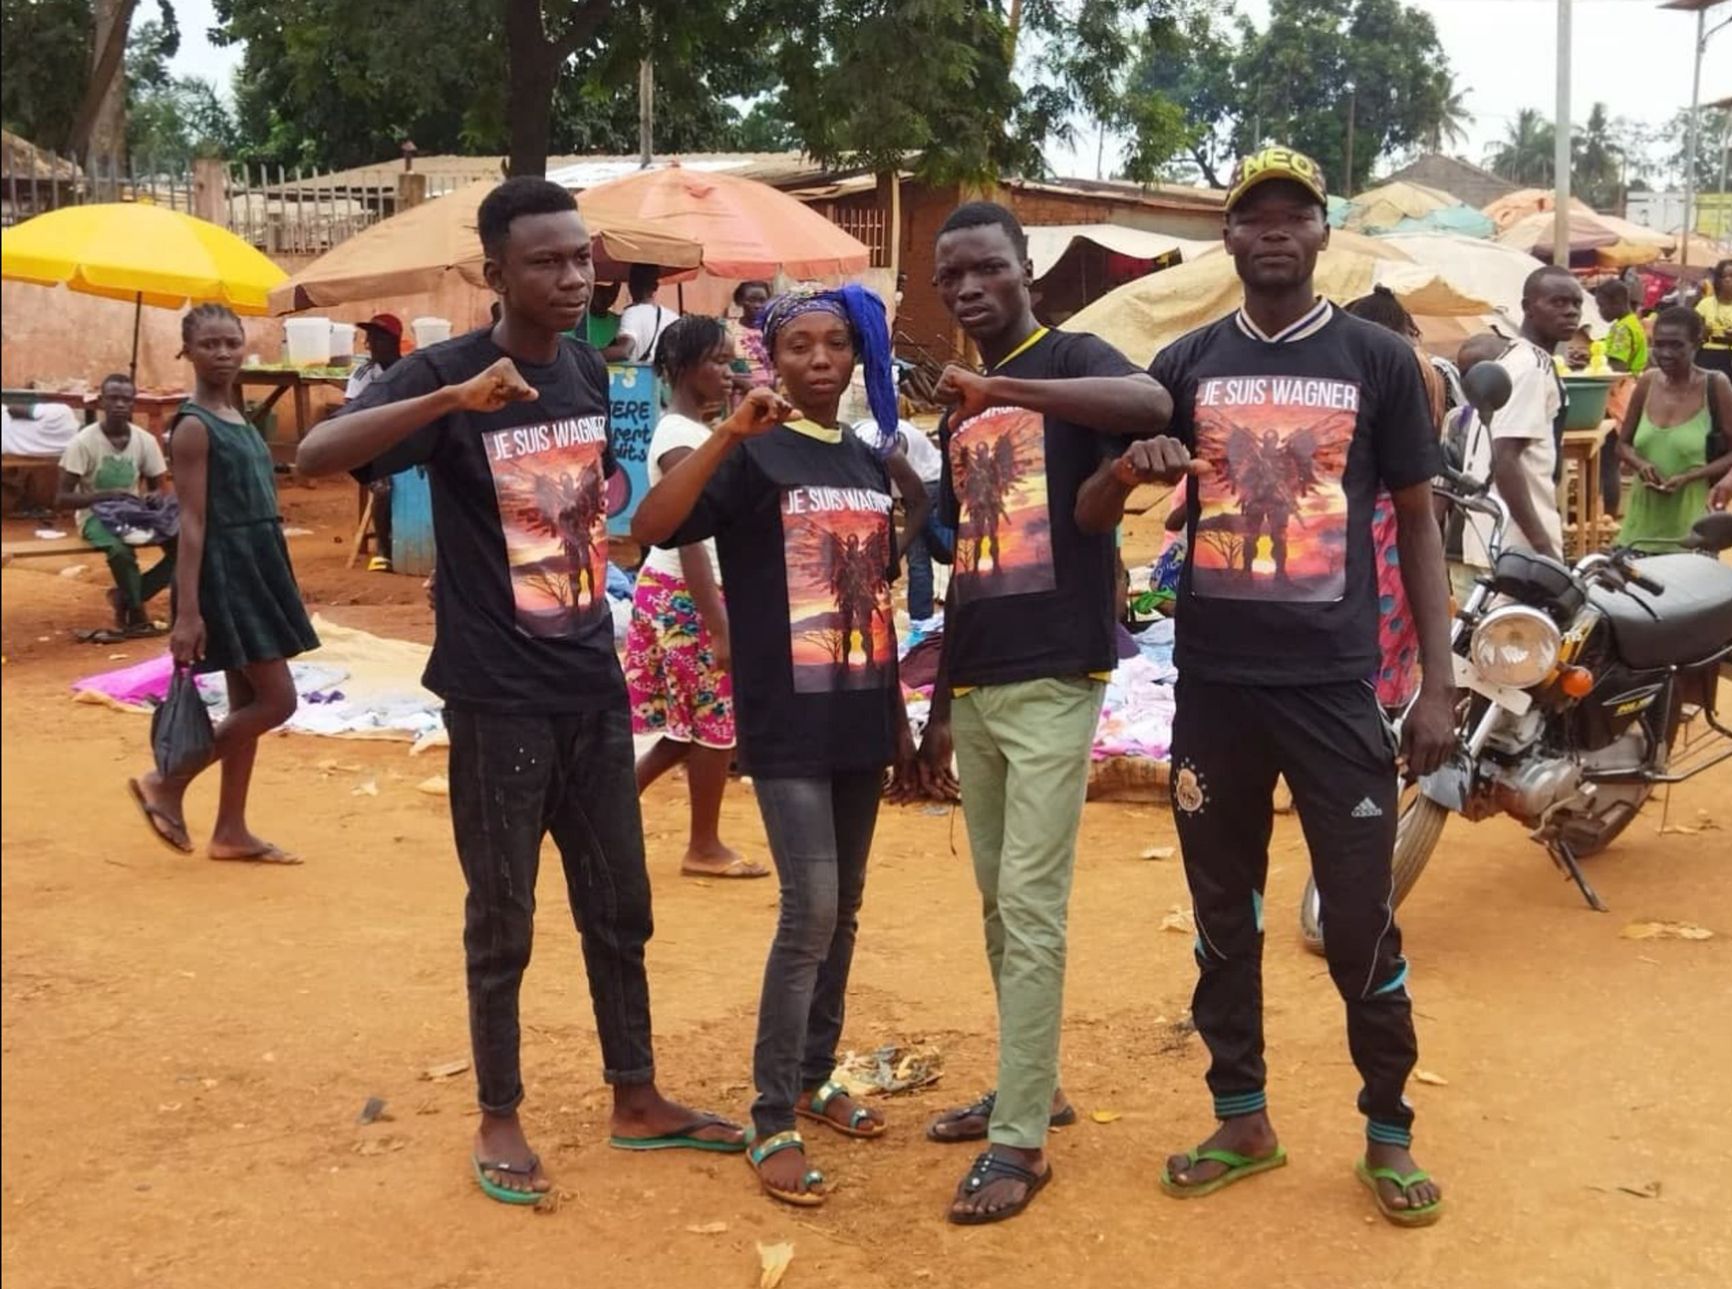 A group of Central African Republic residents wearing “Je suis Wagner” T-shirts